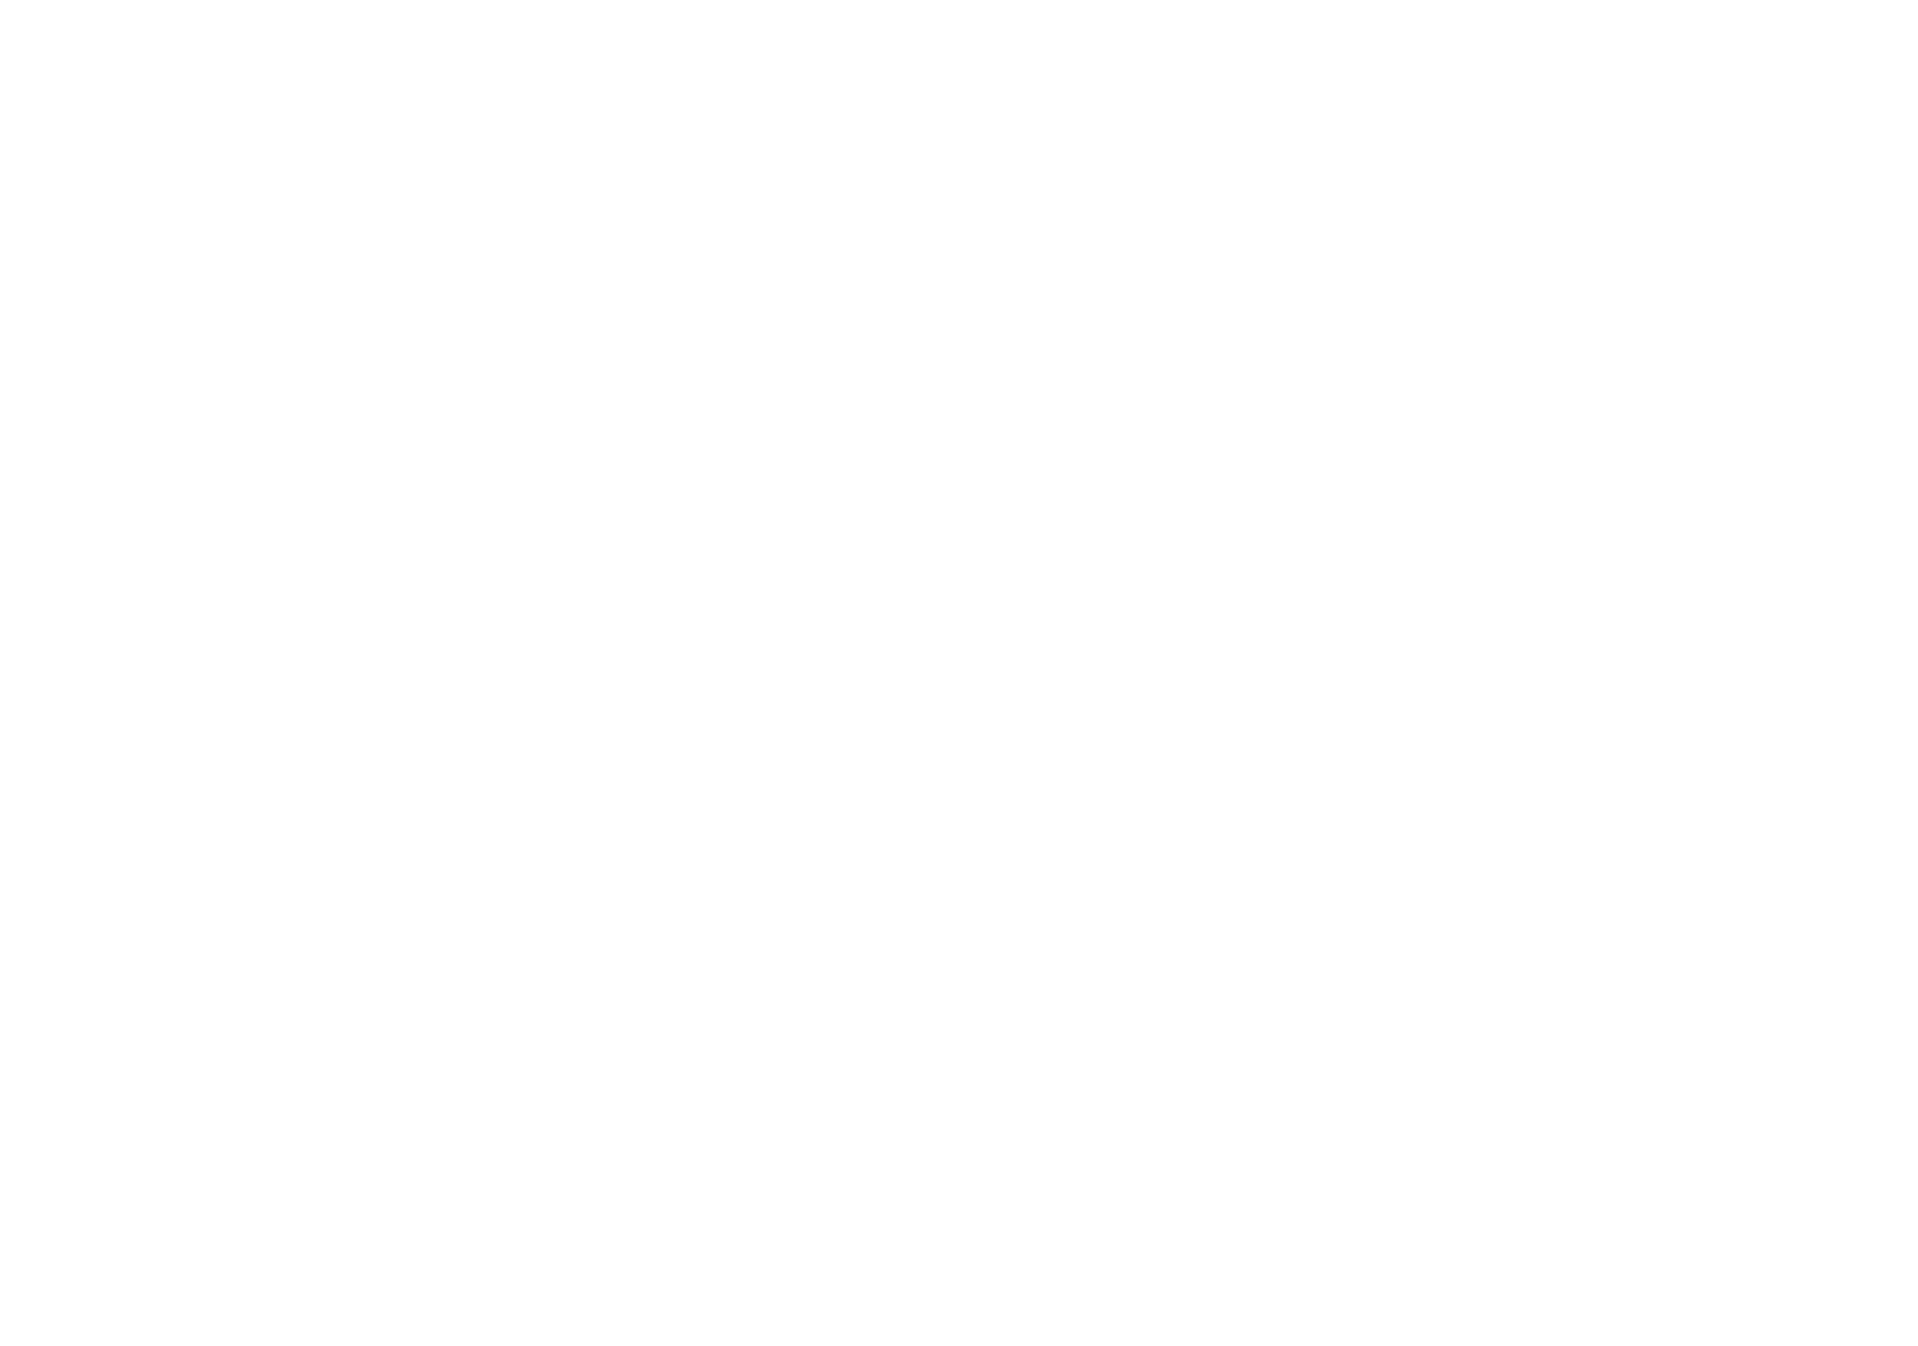 Sliders and cups | Atlas For Media Services